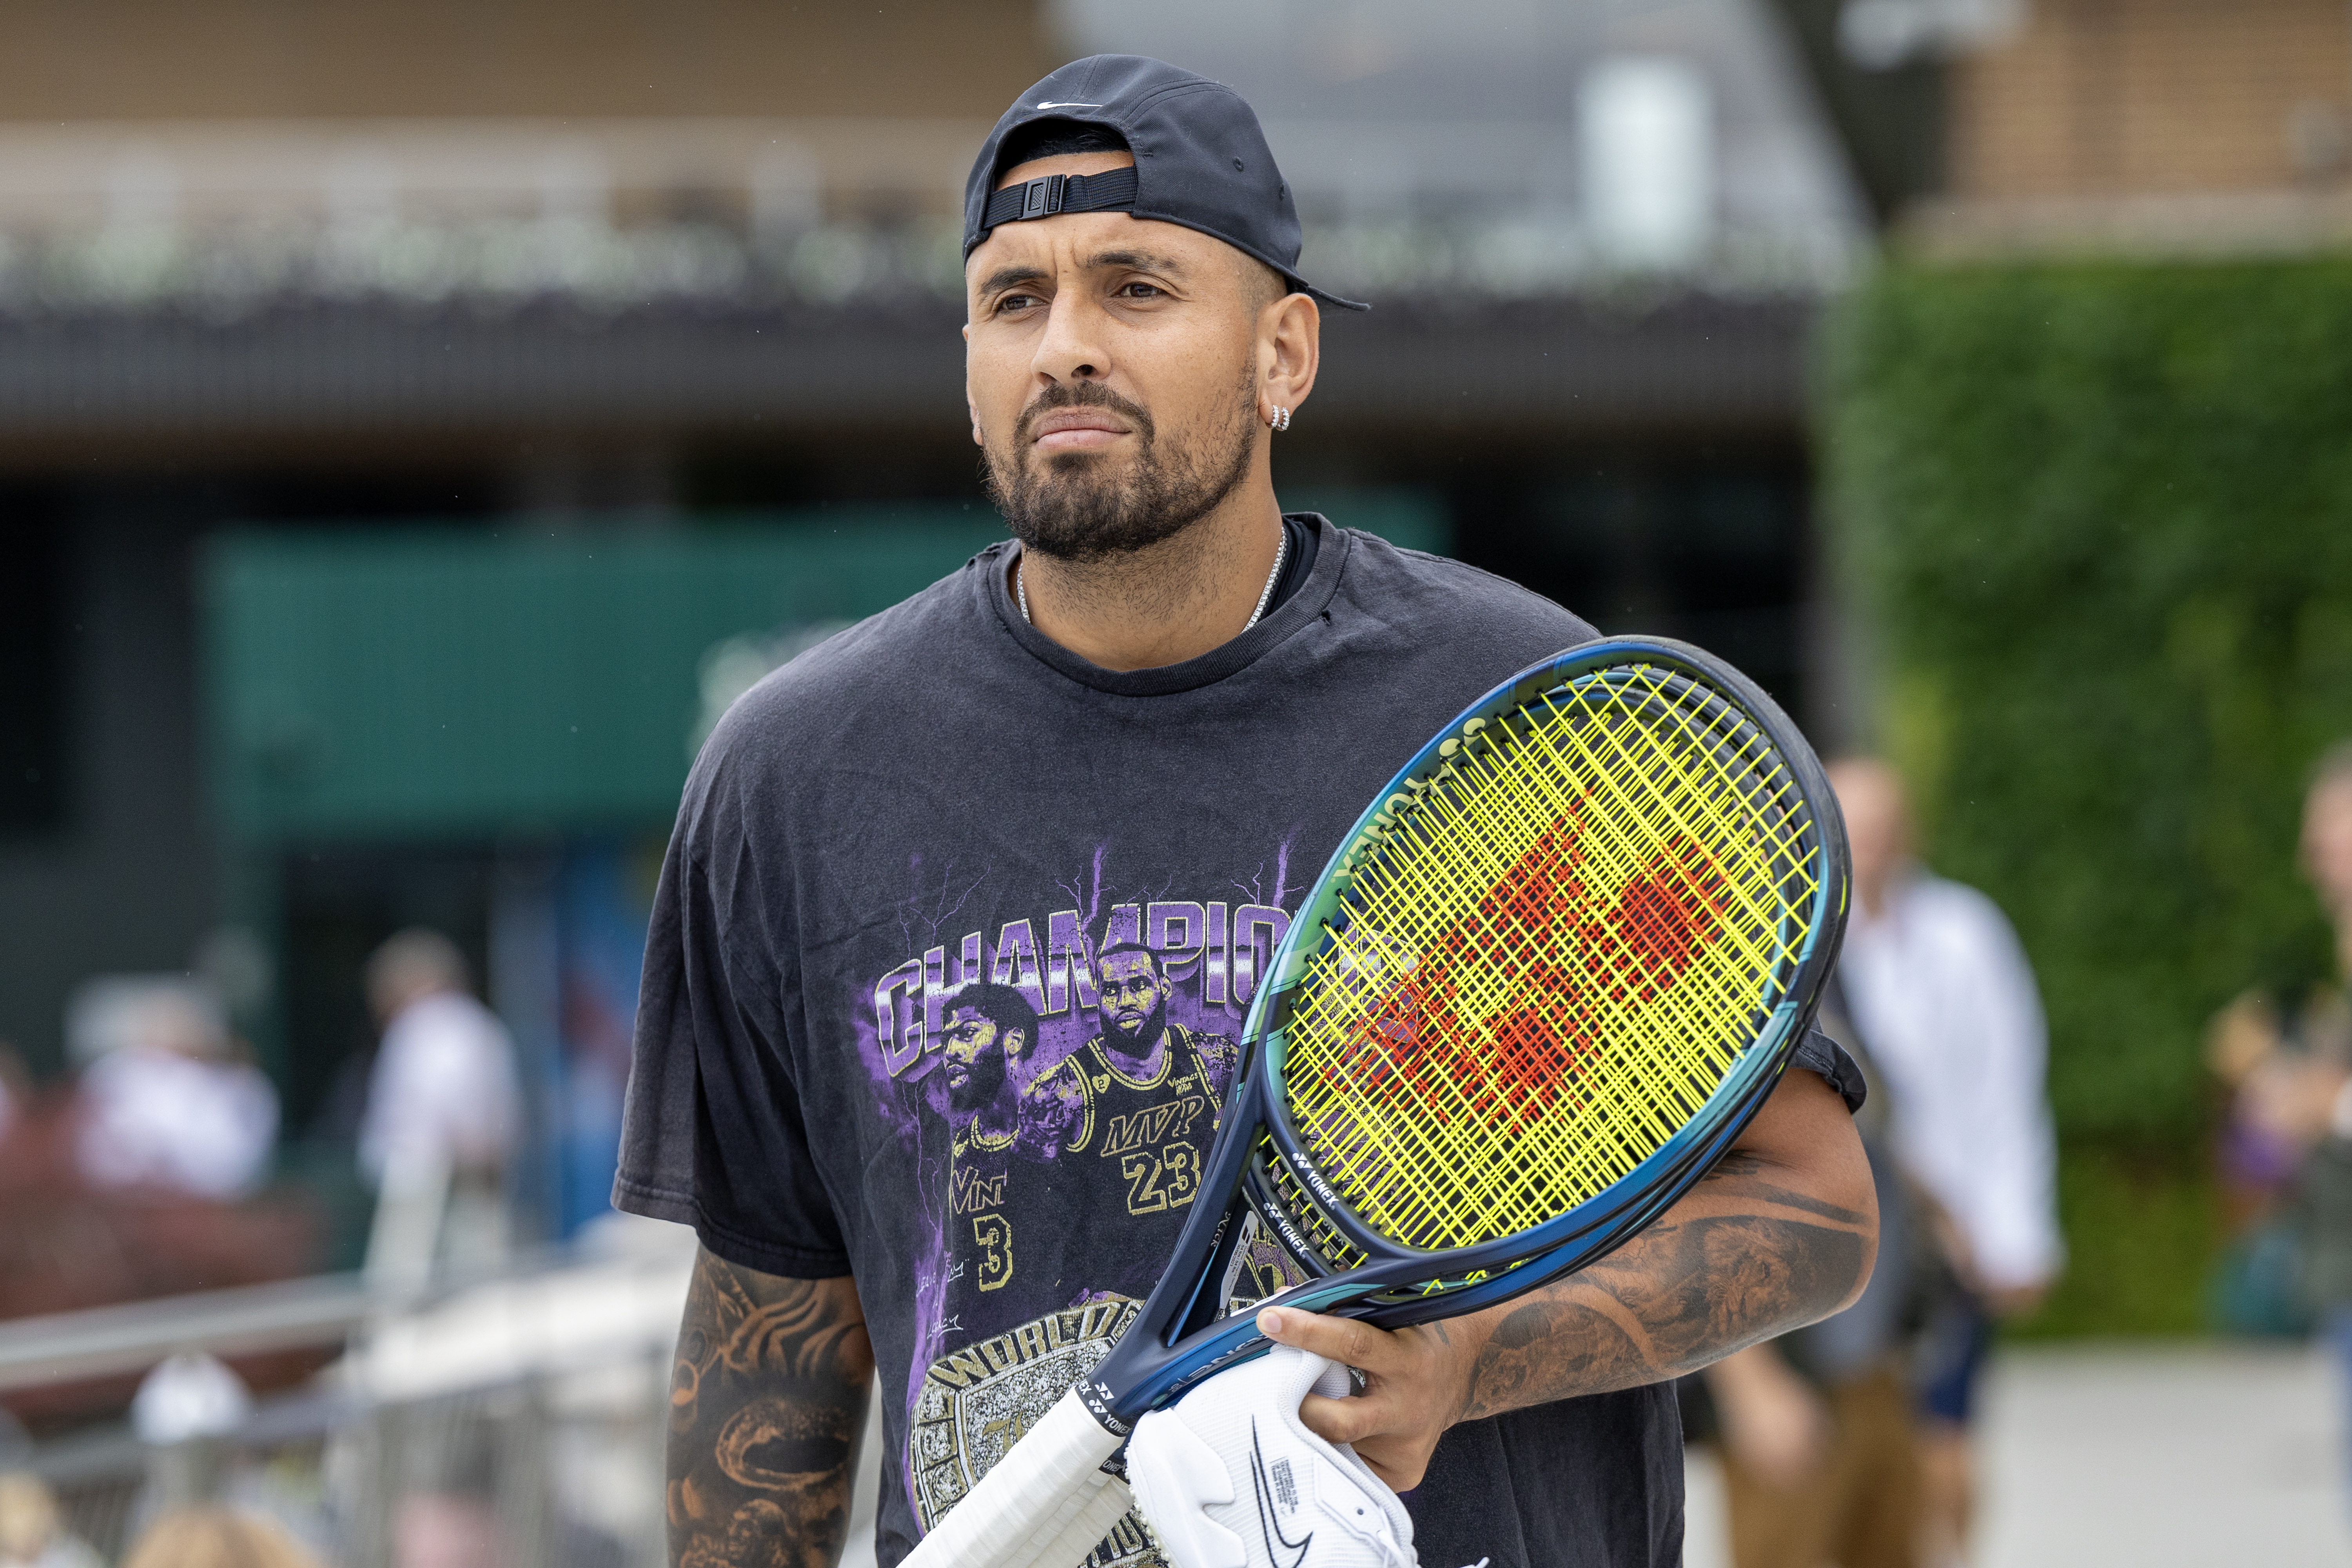 Tennis news 2023 Nick Kyrgios pulls out of the US Open, misses all four Grand Slam tournaments in 2023